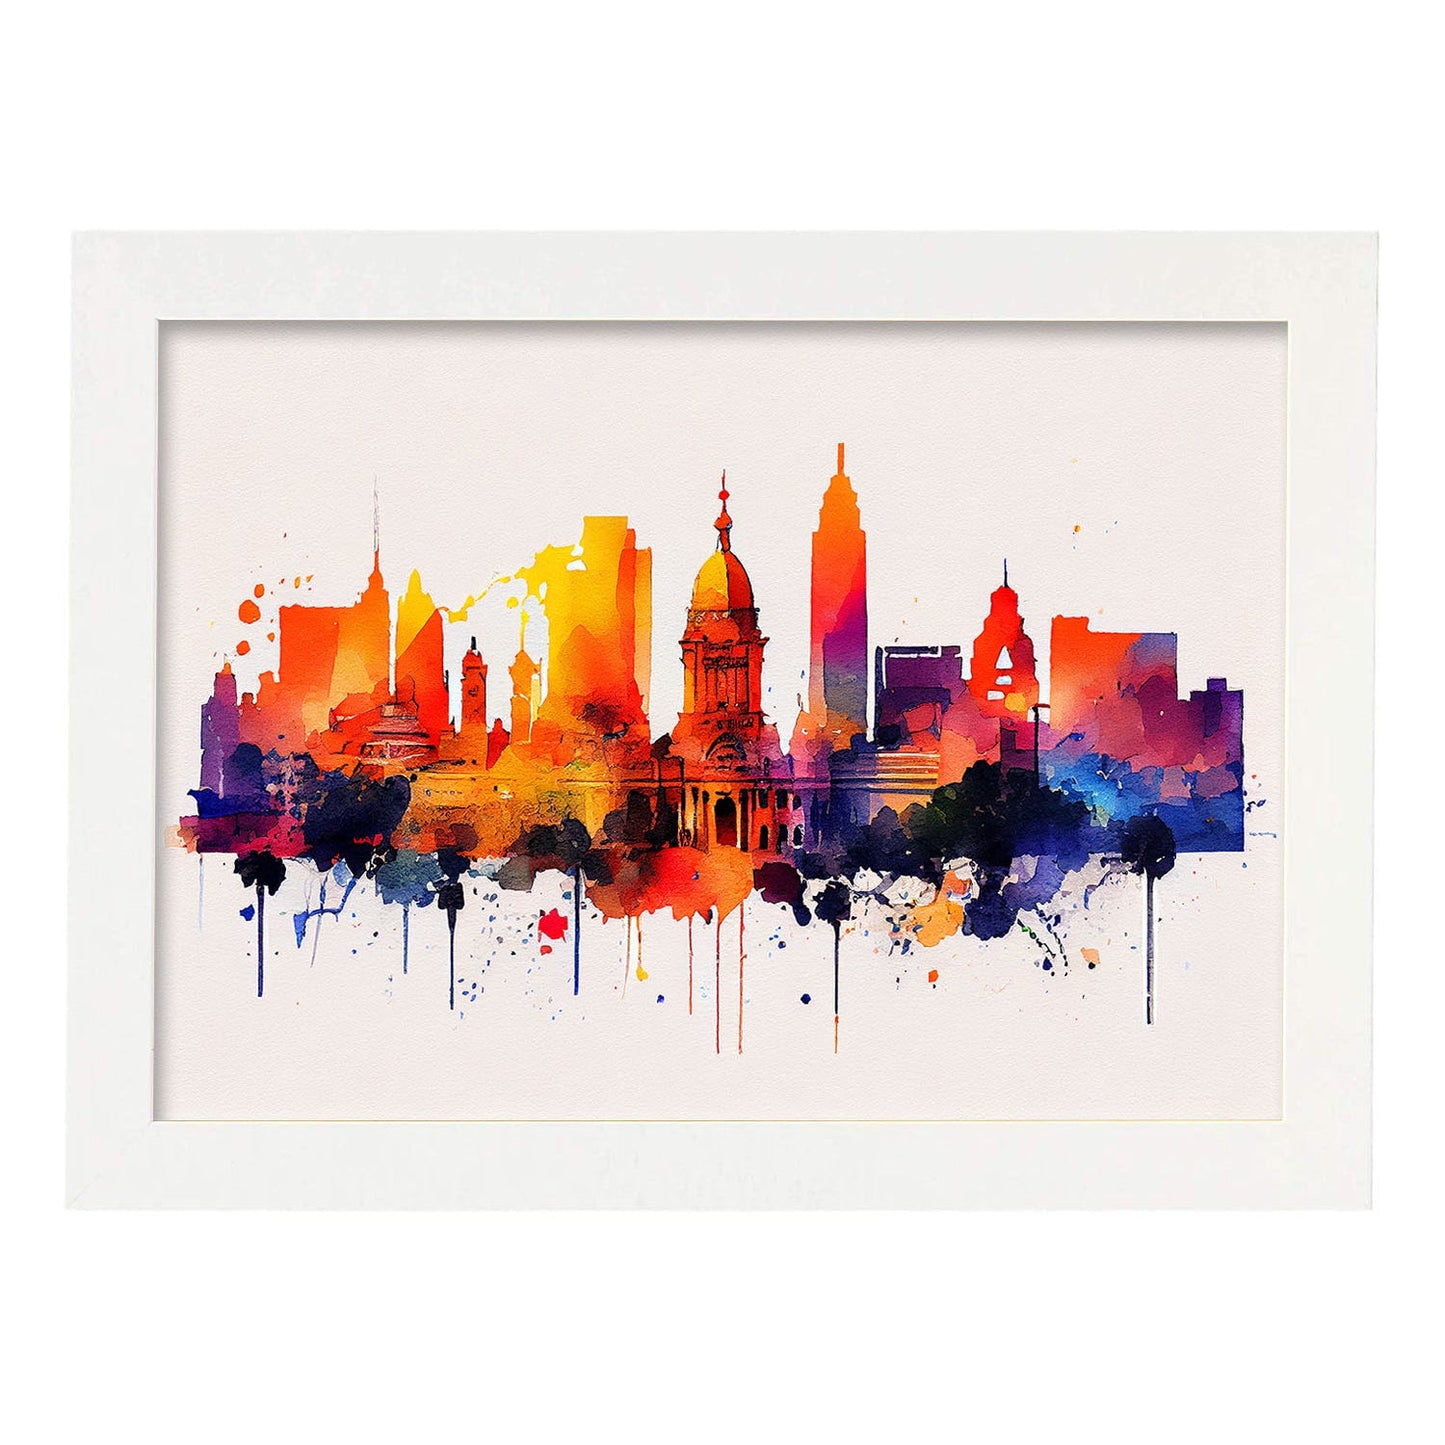 Nacnic watercolor of a skyline of the city of Buenos Aires_2. Aesthetic Wall Art Prints for Bedroom or Living Room Design.-Artwork-Nacnic-A4-Marco Blanco-Nacnic Estudio SL